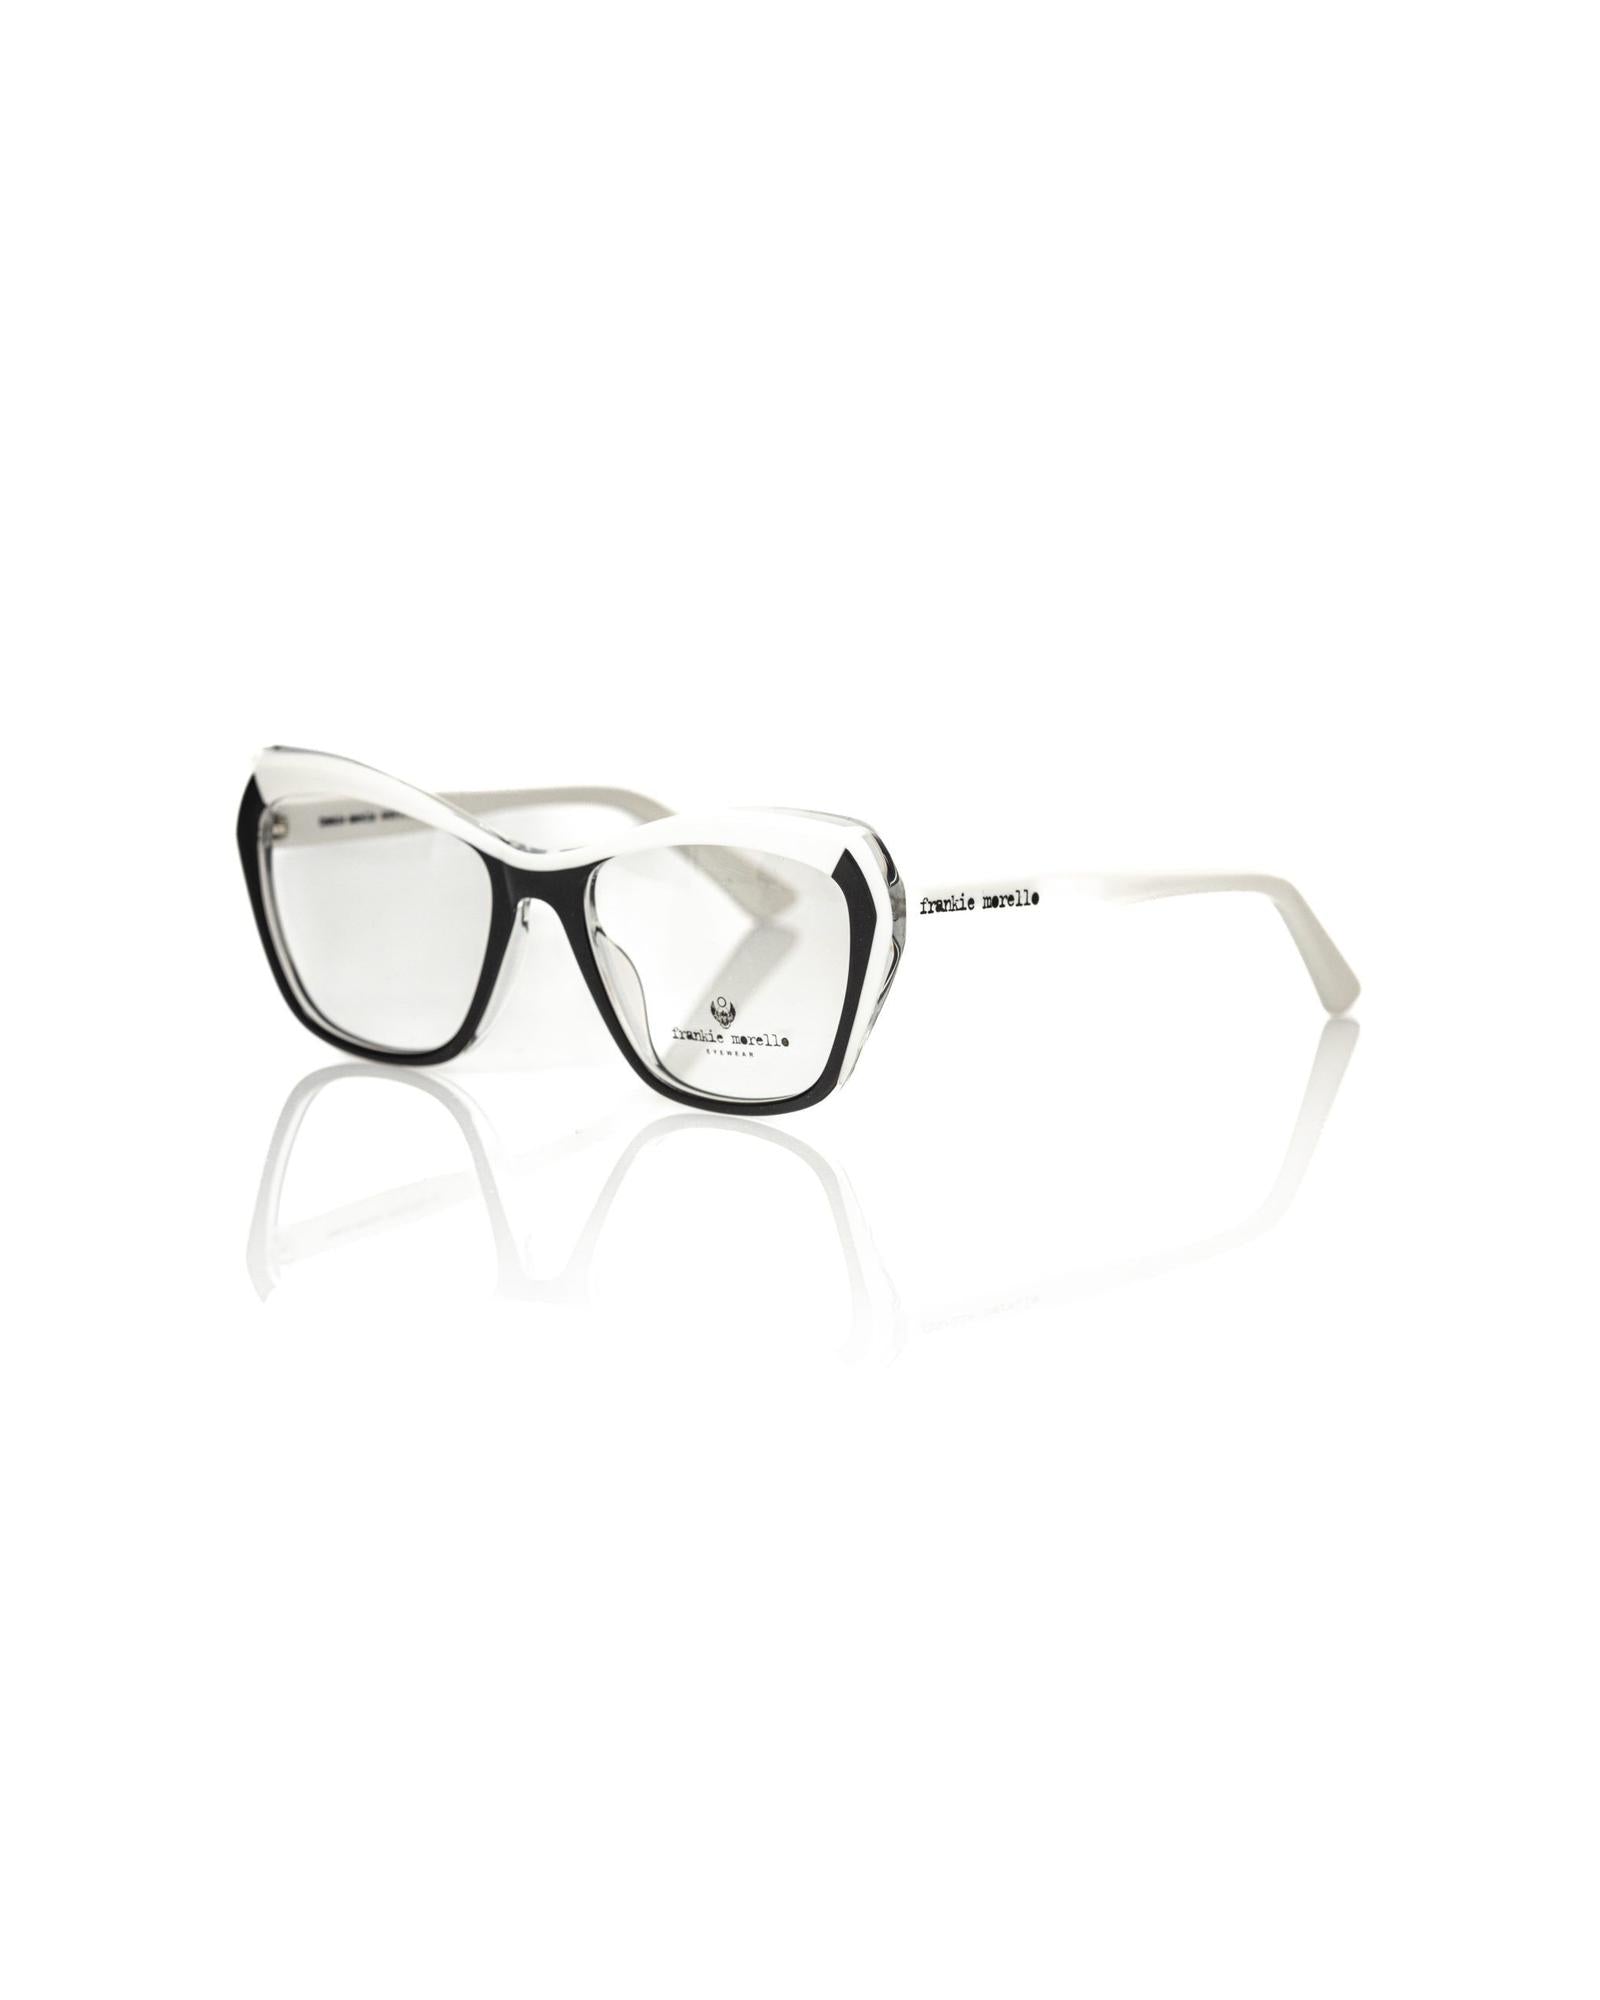 Cat Eye Eyeglasses with Black Frame and White/Transparent Profile &amp; Temples One Size Women